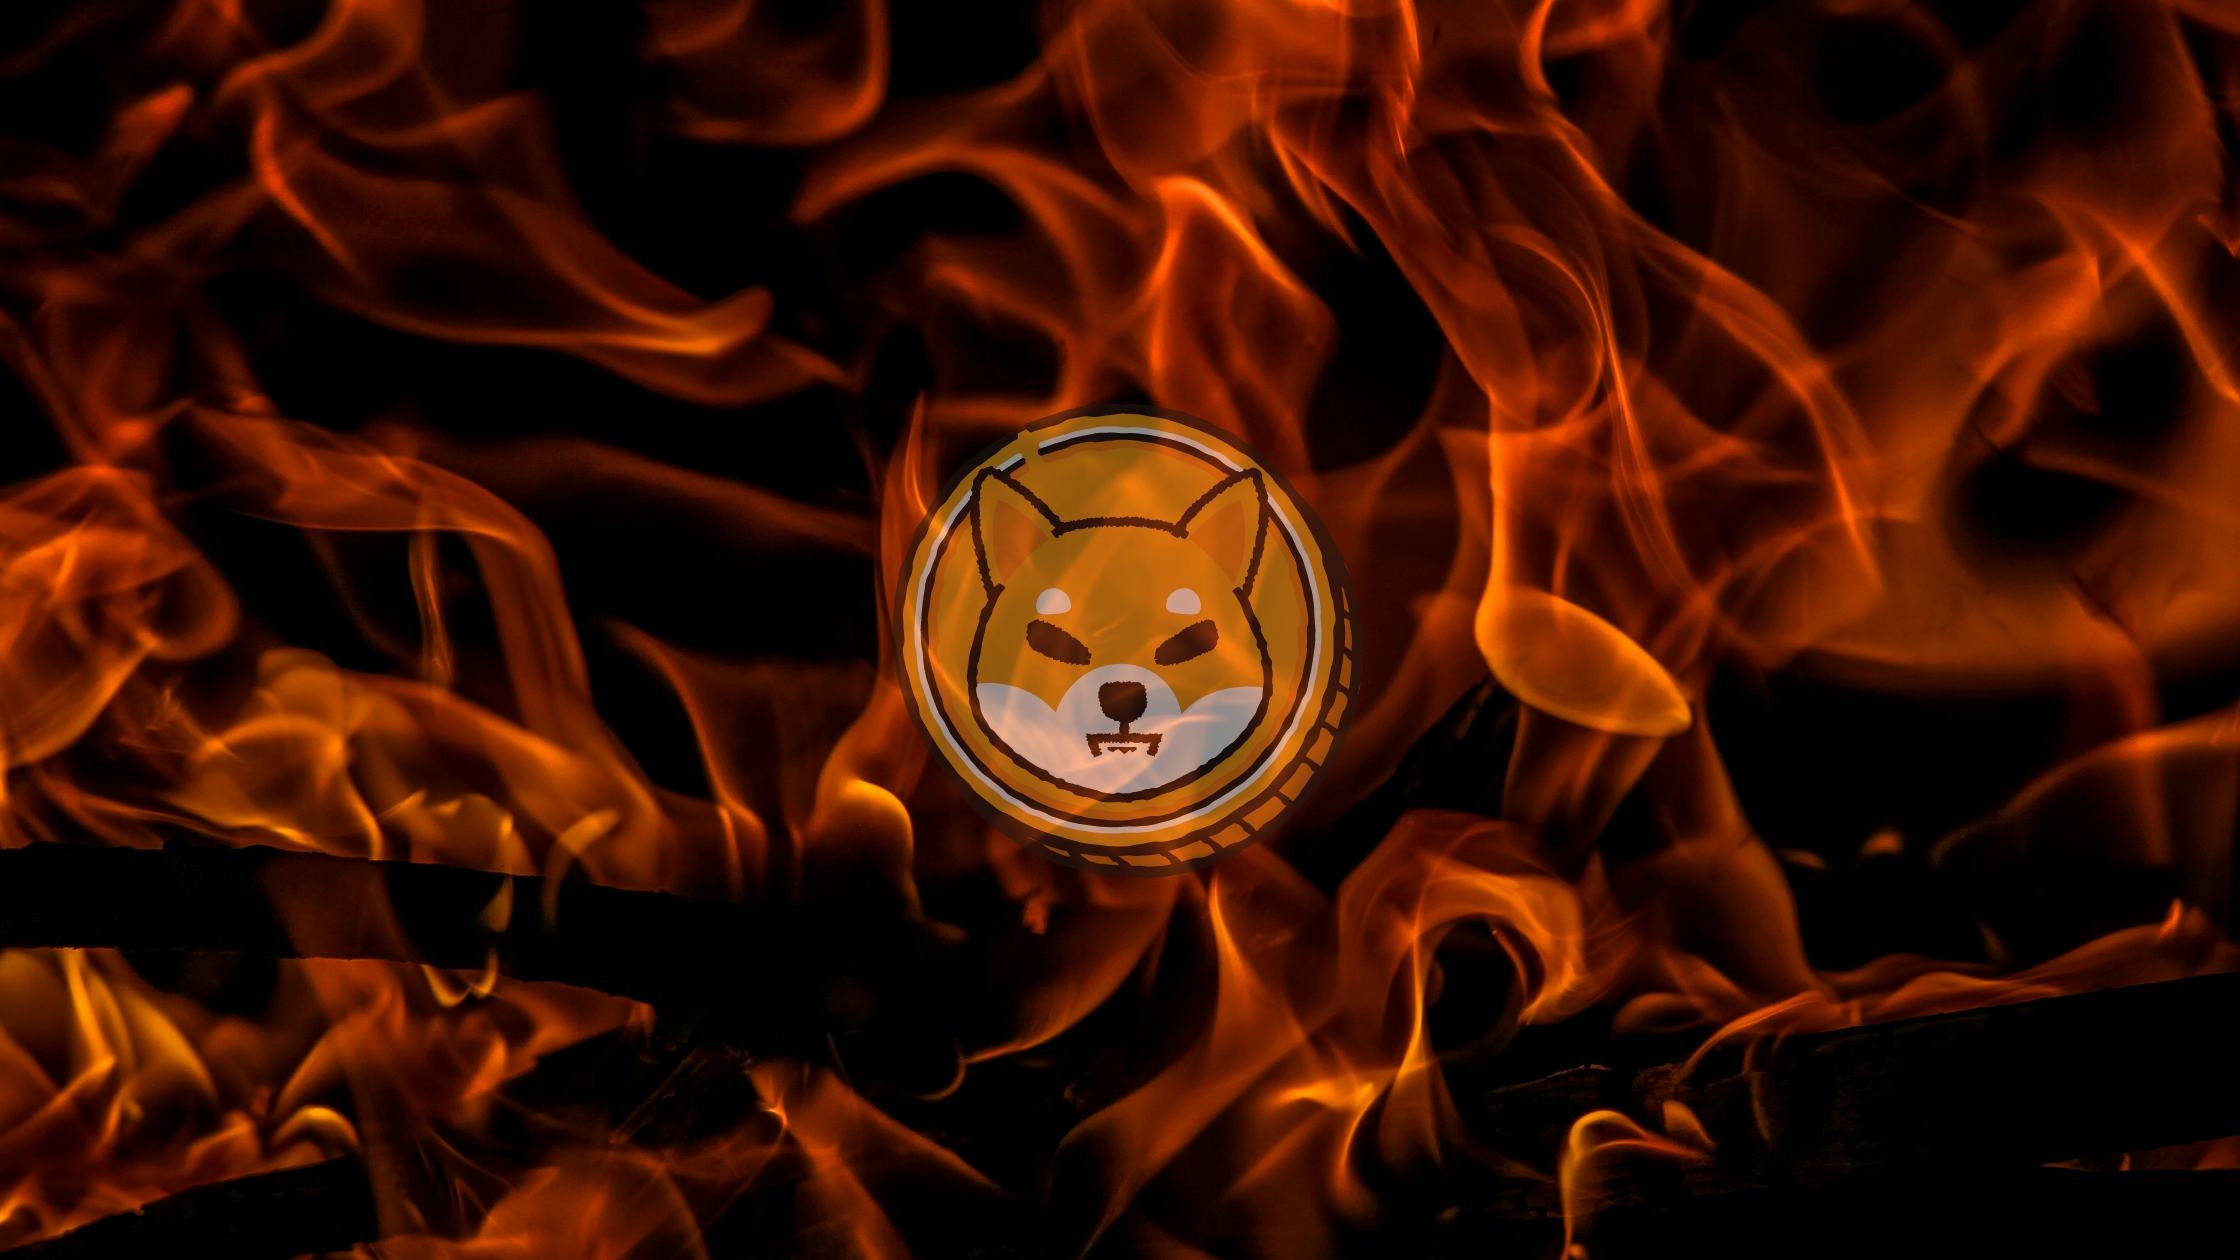 4.76 Billion SHIB Burned in July as Staggering Amount of SHIB Sent to Dead Wallets